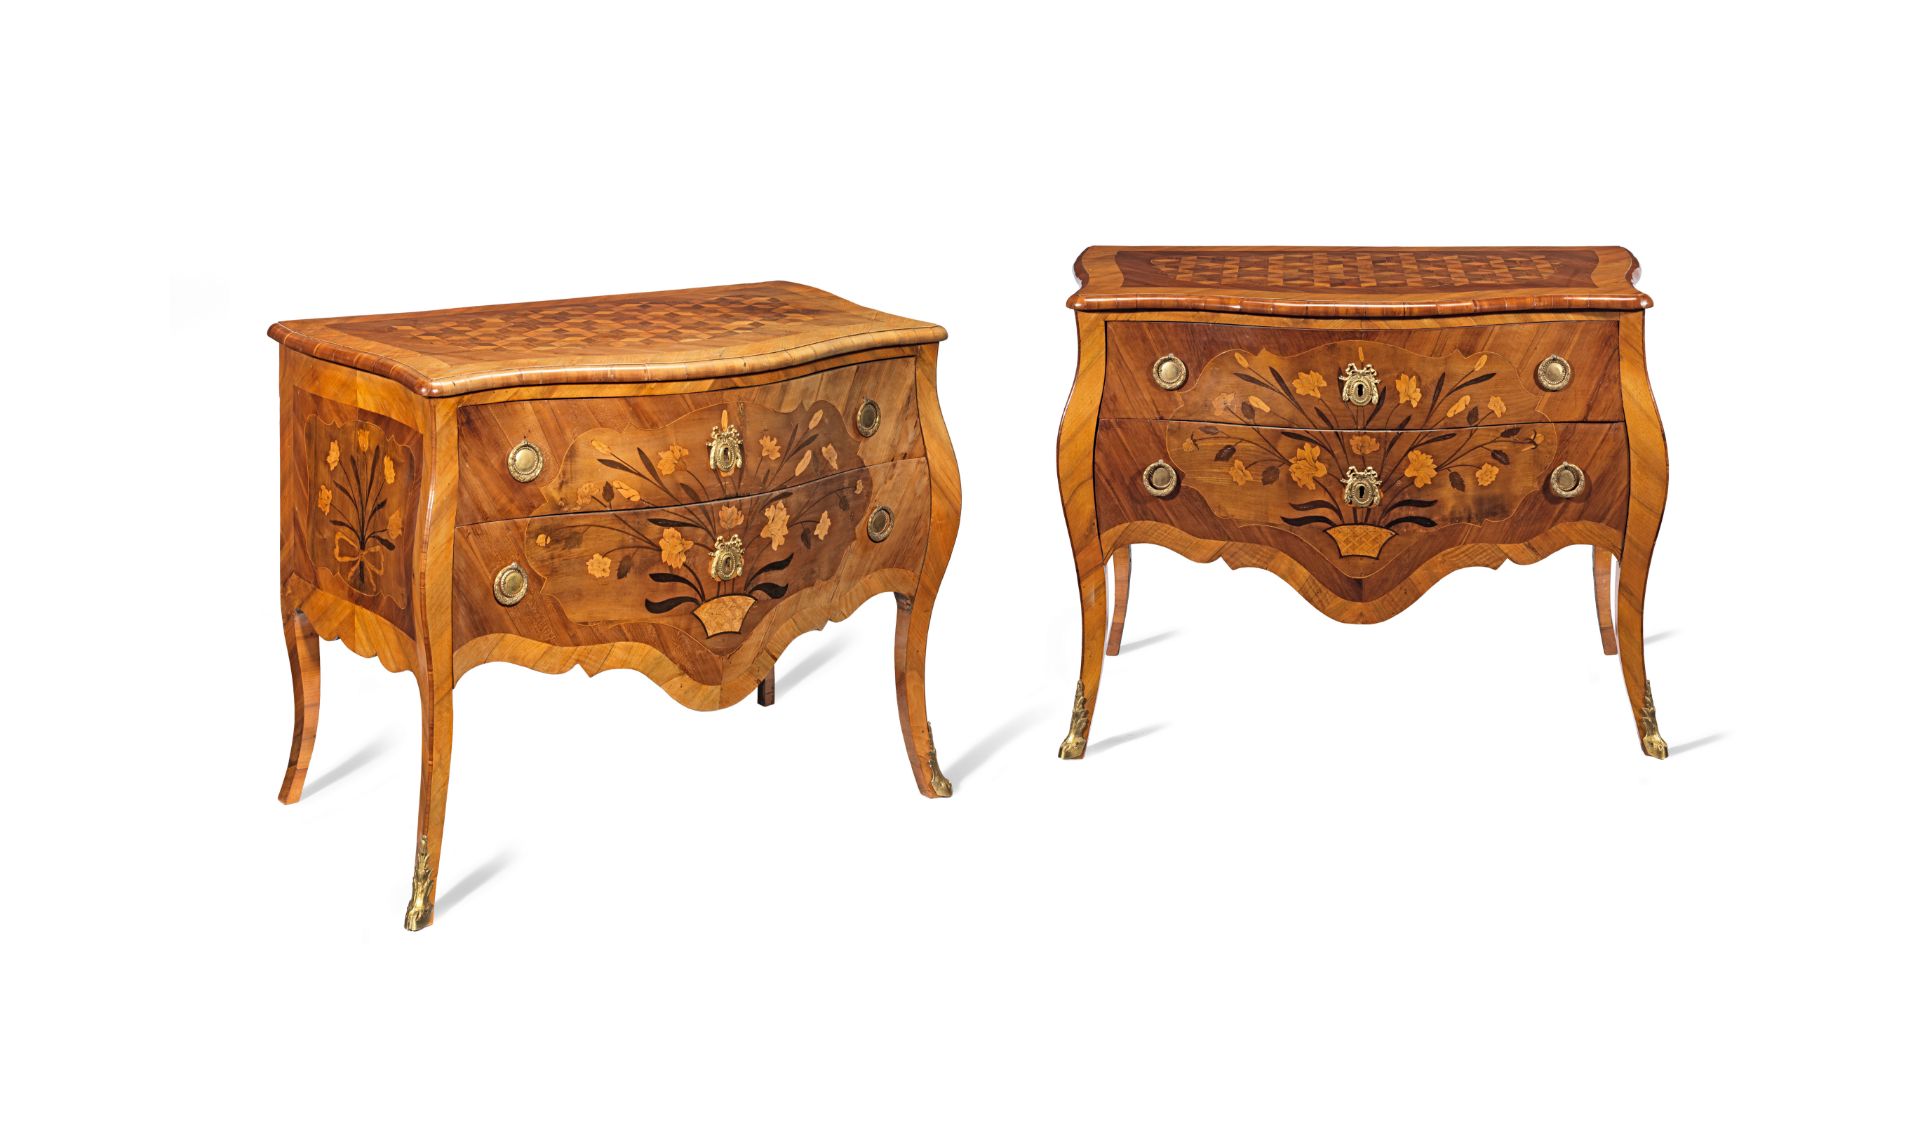 A pair of German third quarter 18th century walnut, ebonised, fruitwood marquetry and parquetry s...